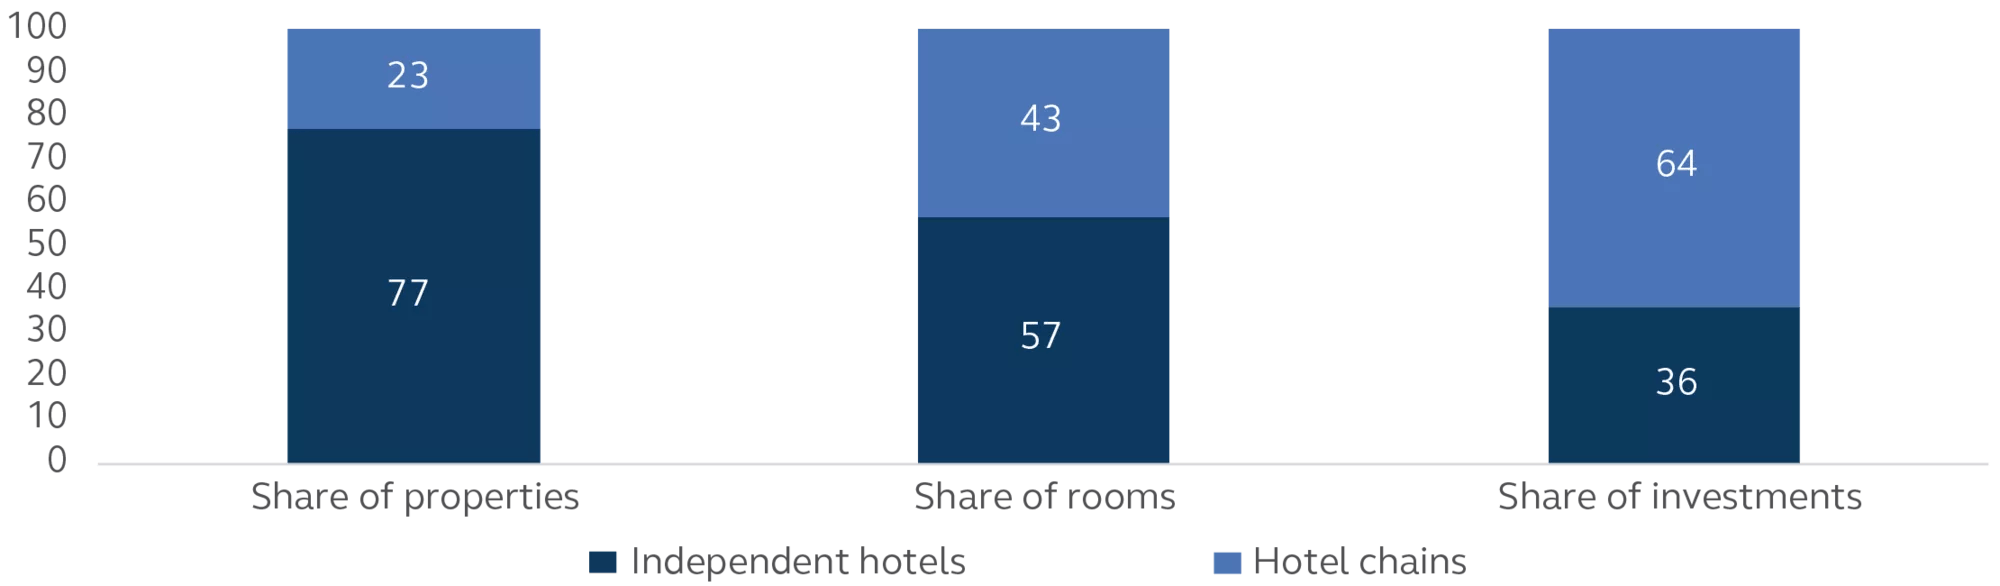 European hotel market share broken out by share of properties, share of rooms, and share of investments.